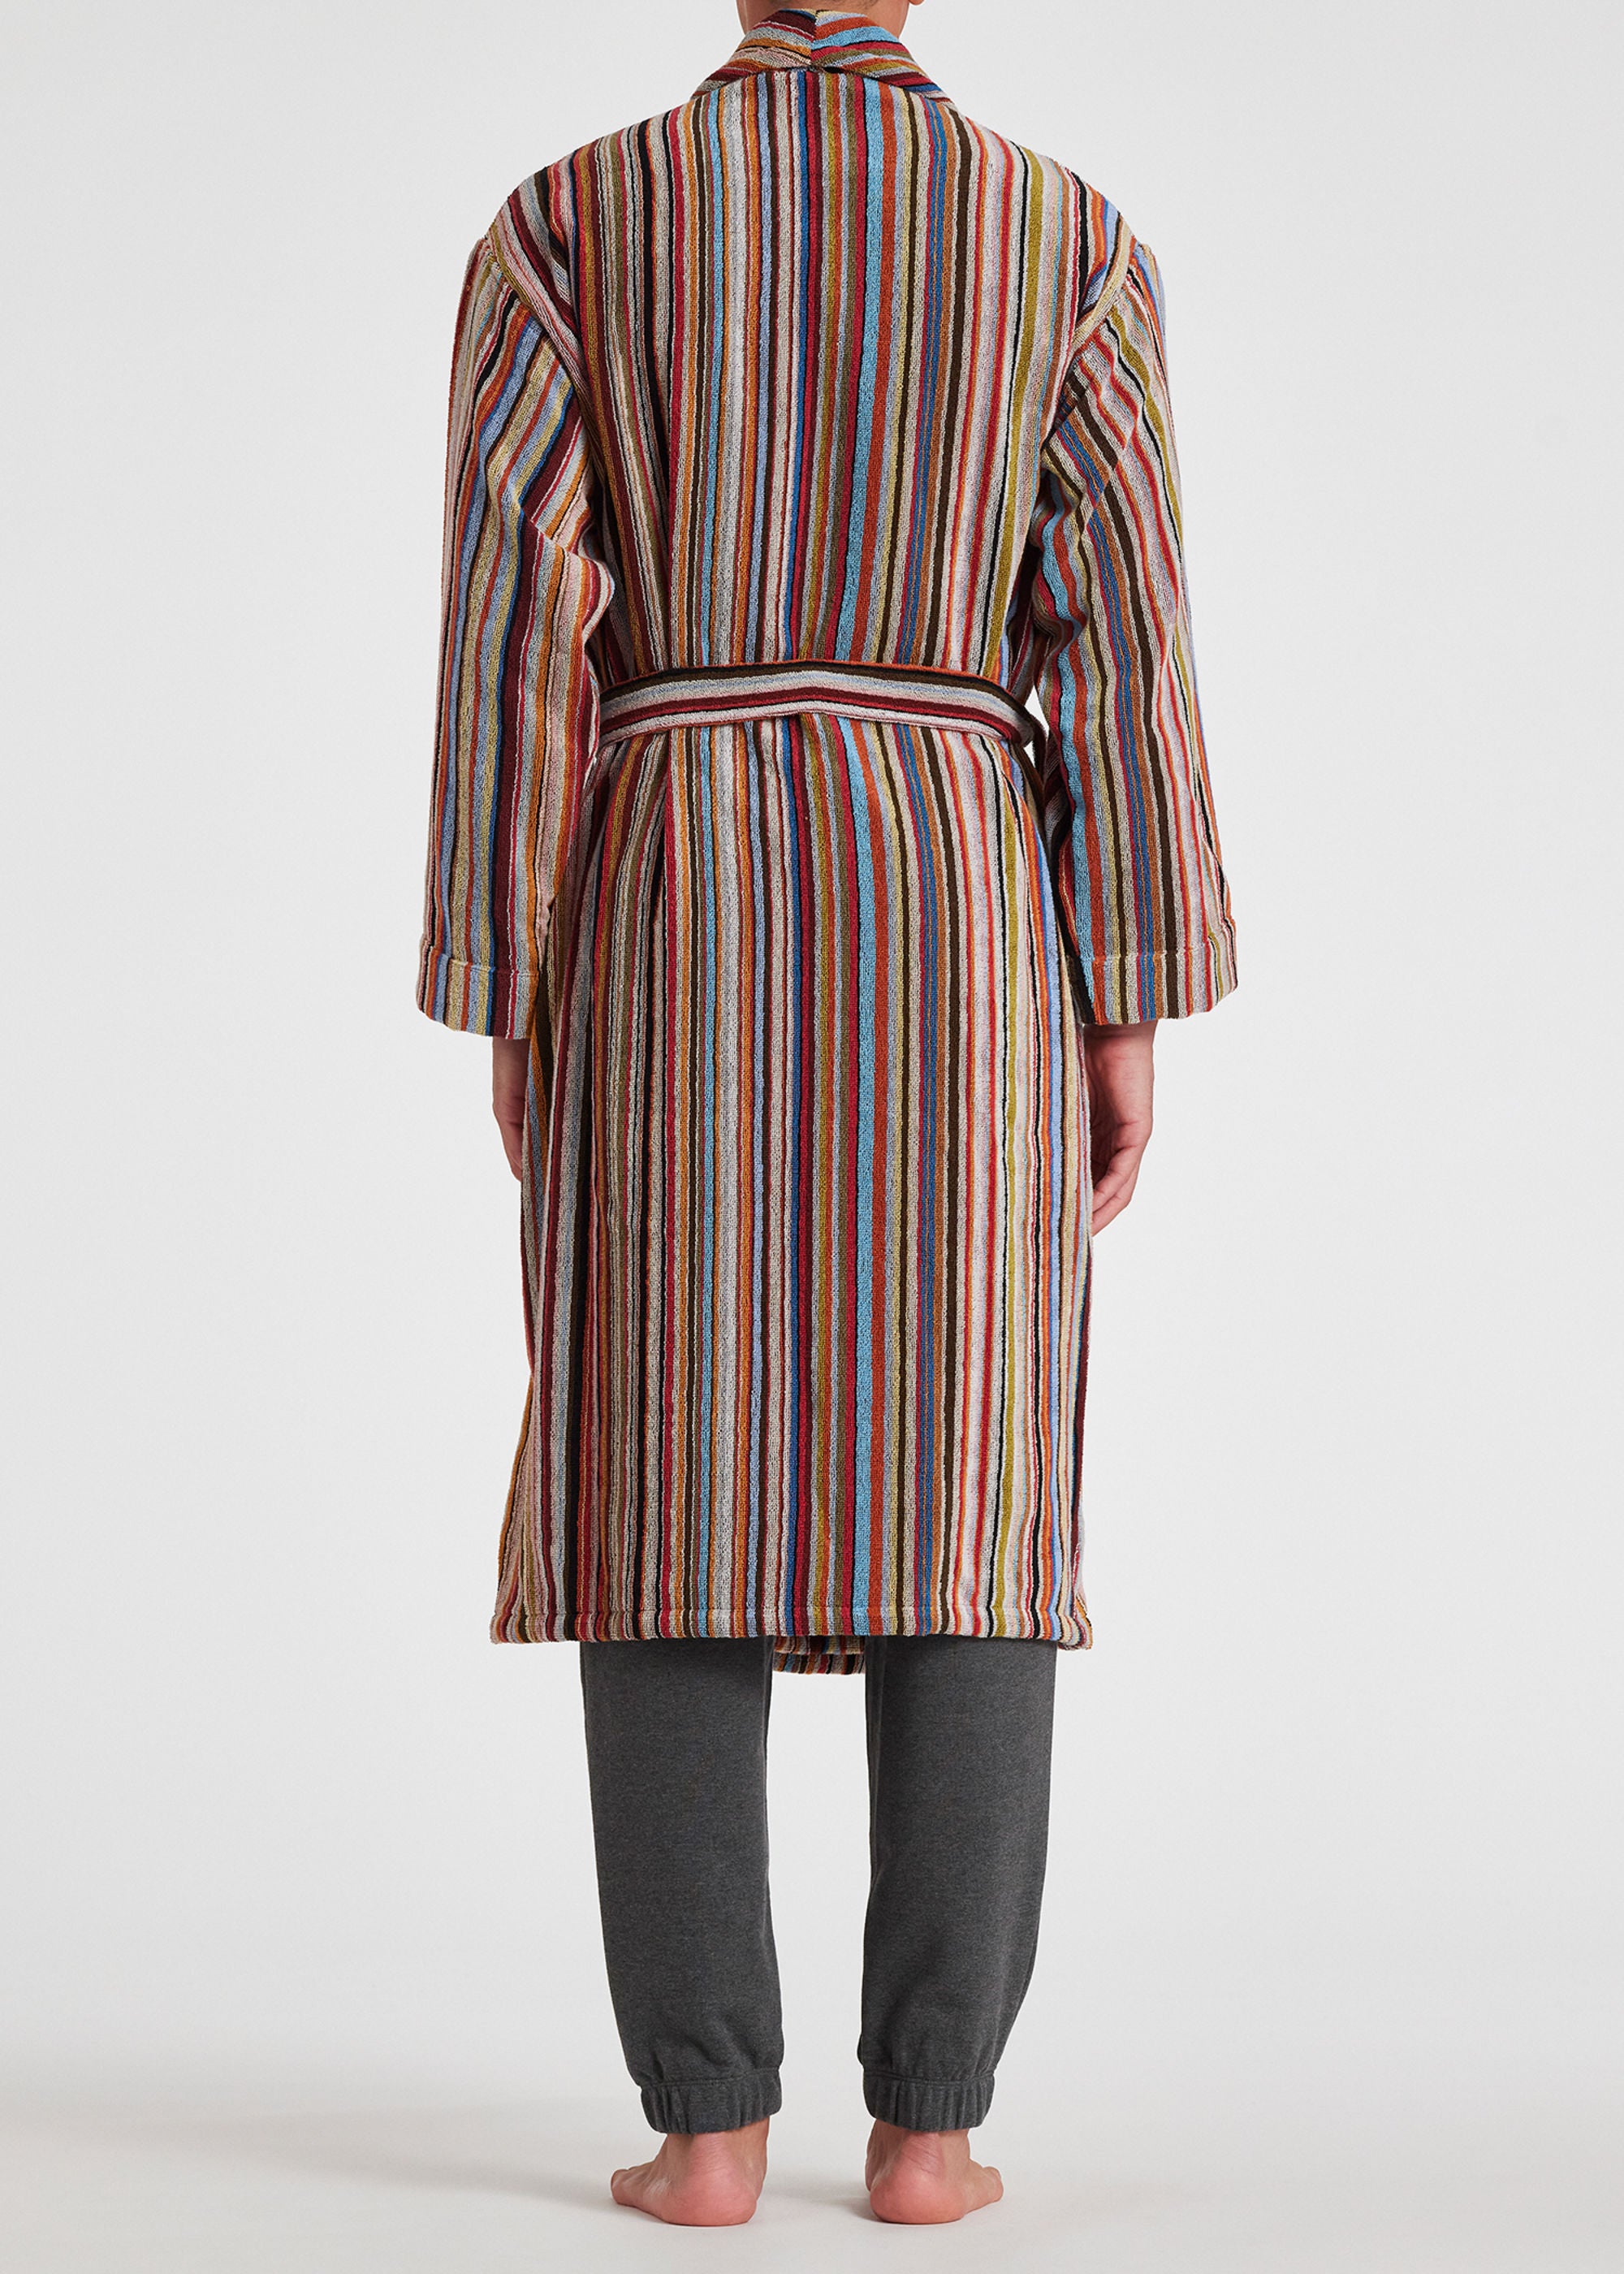 PS Paul Smith Multistripe Dressing Gown 92 Multi